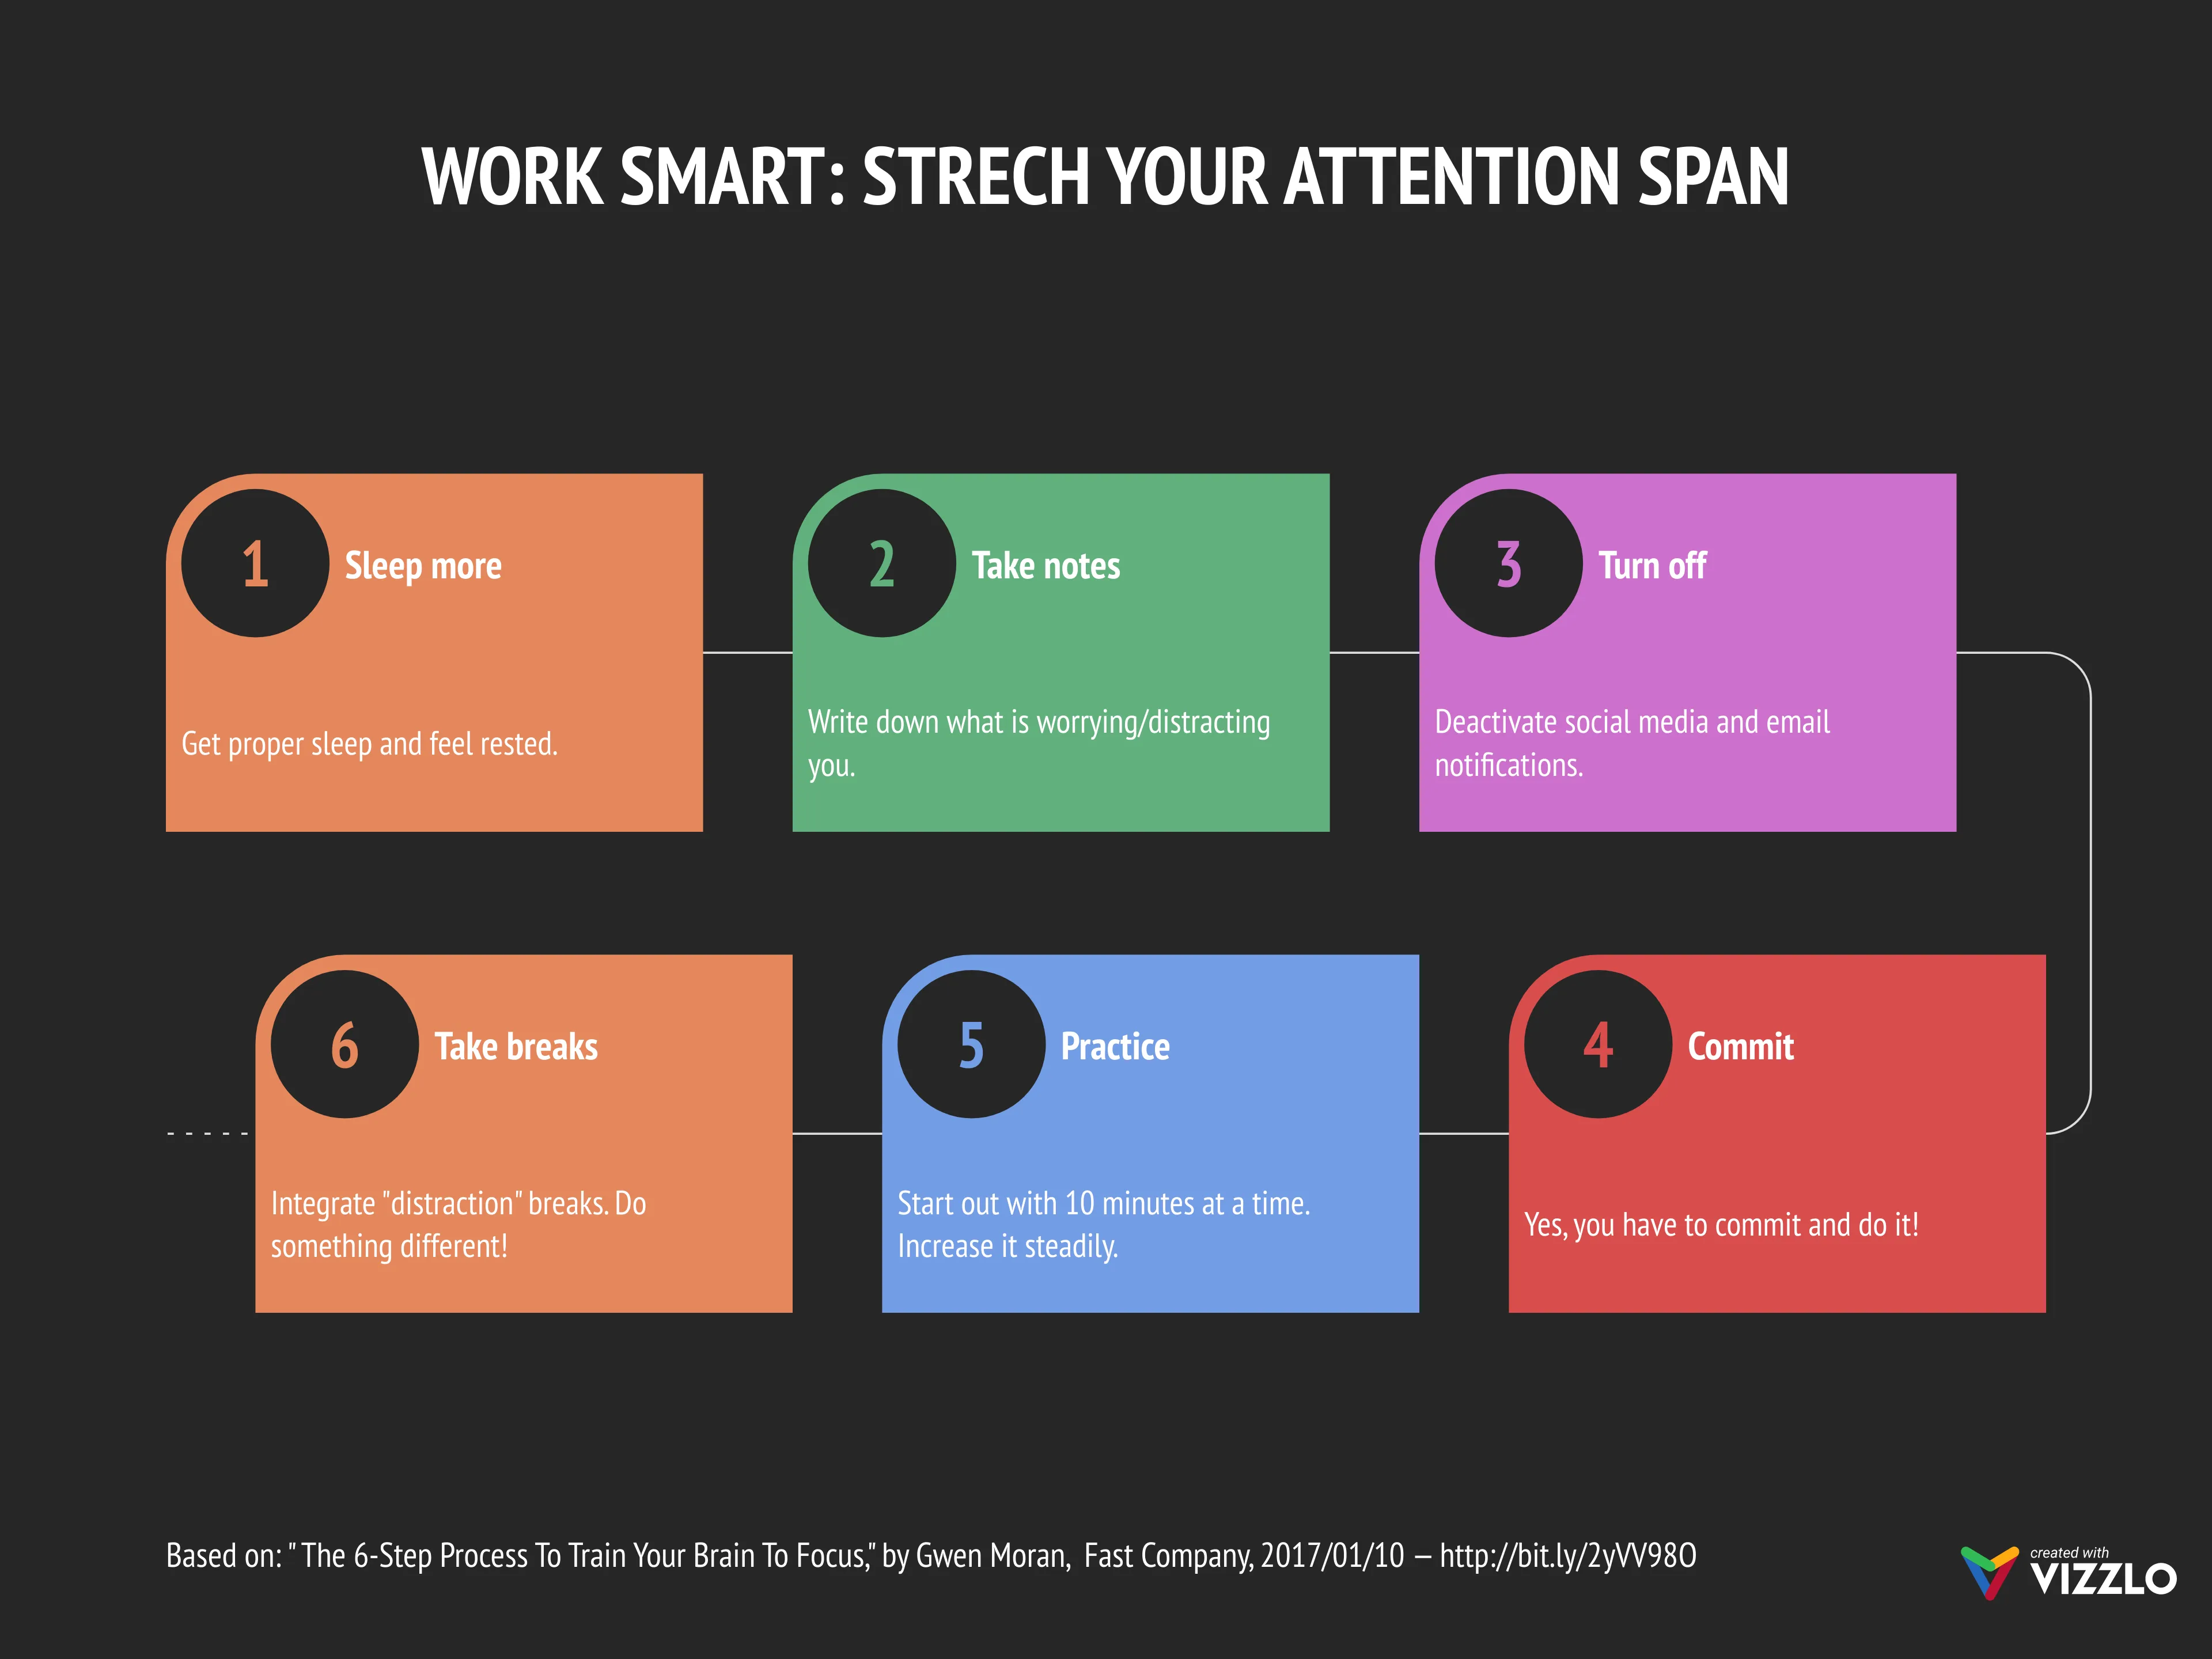 WORK SMART: STRECH YOUR ATTENTION SPAN